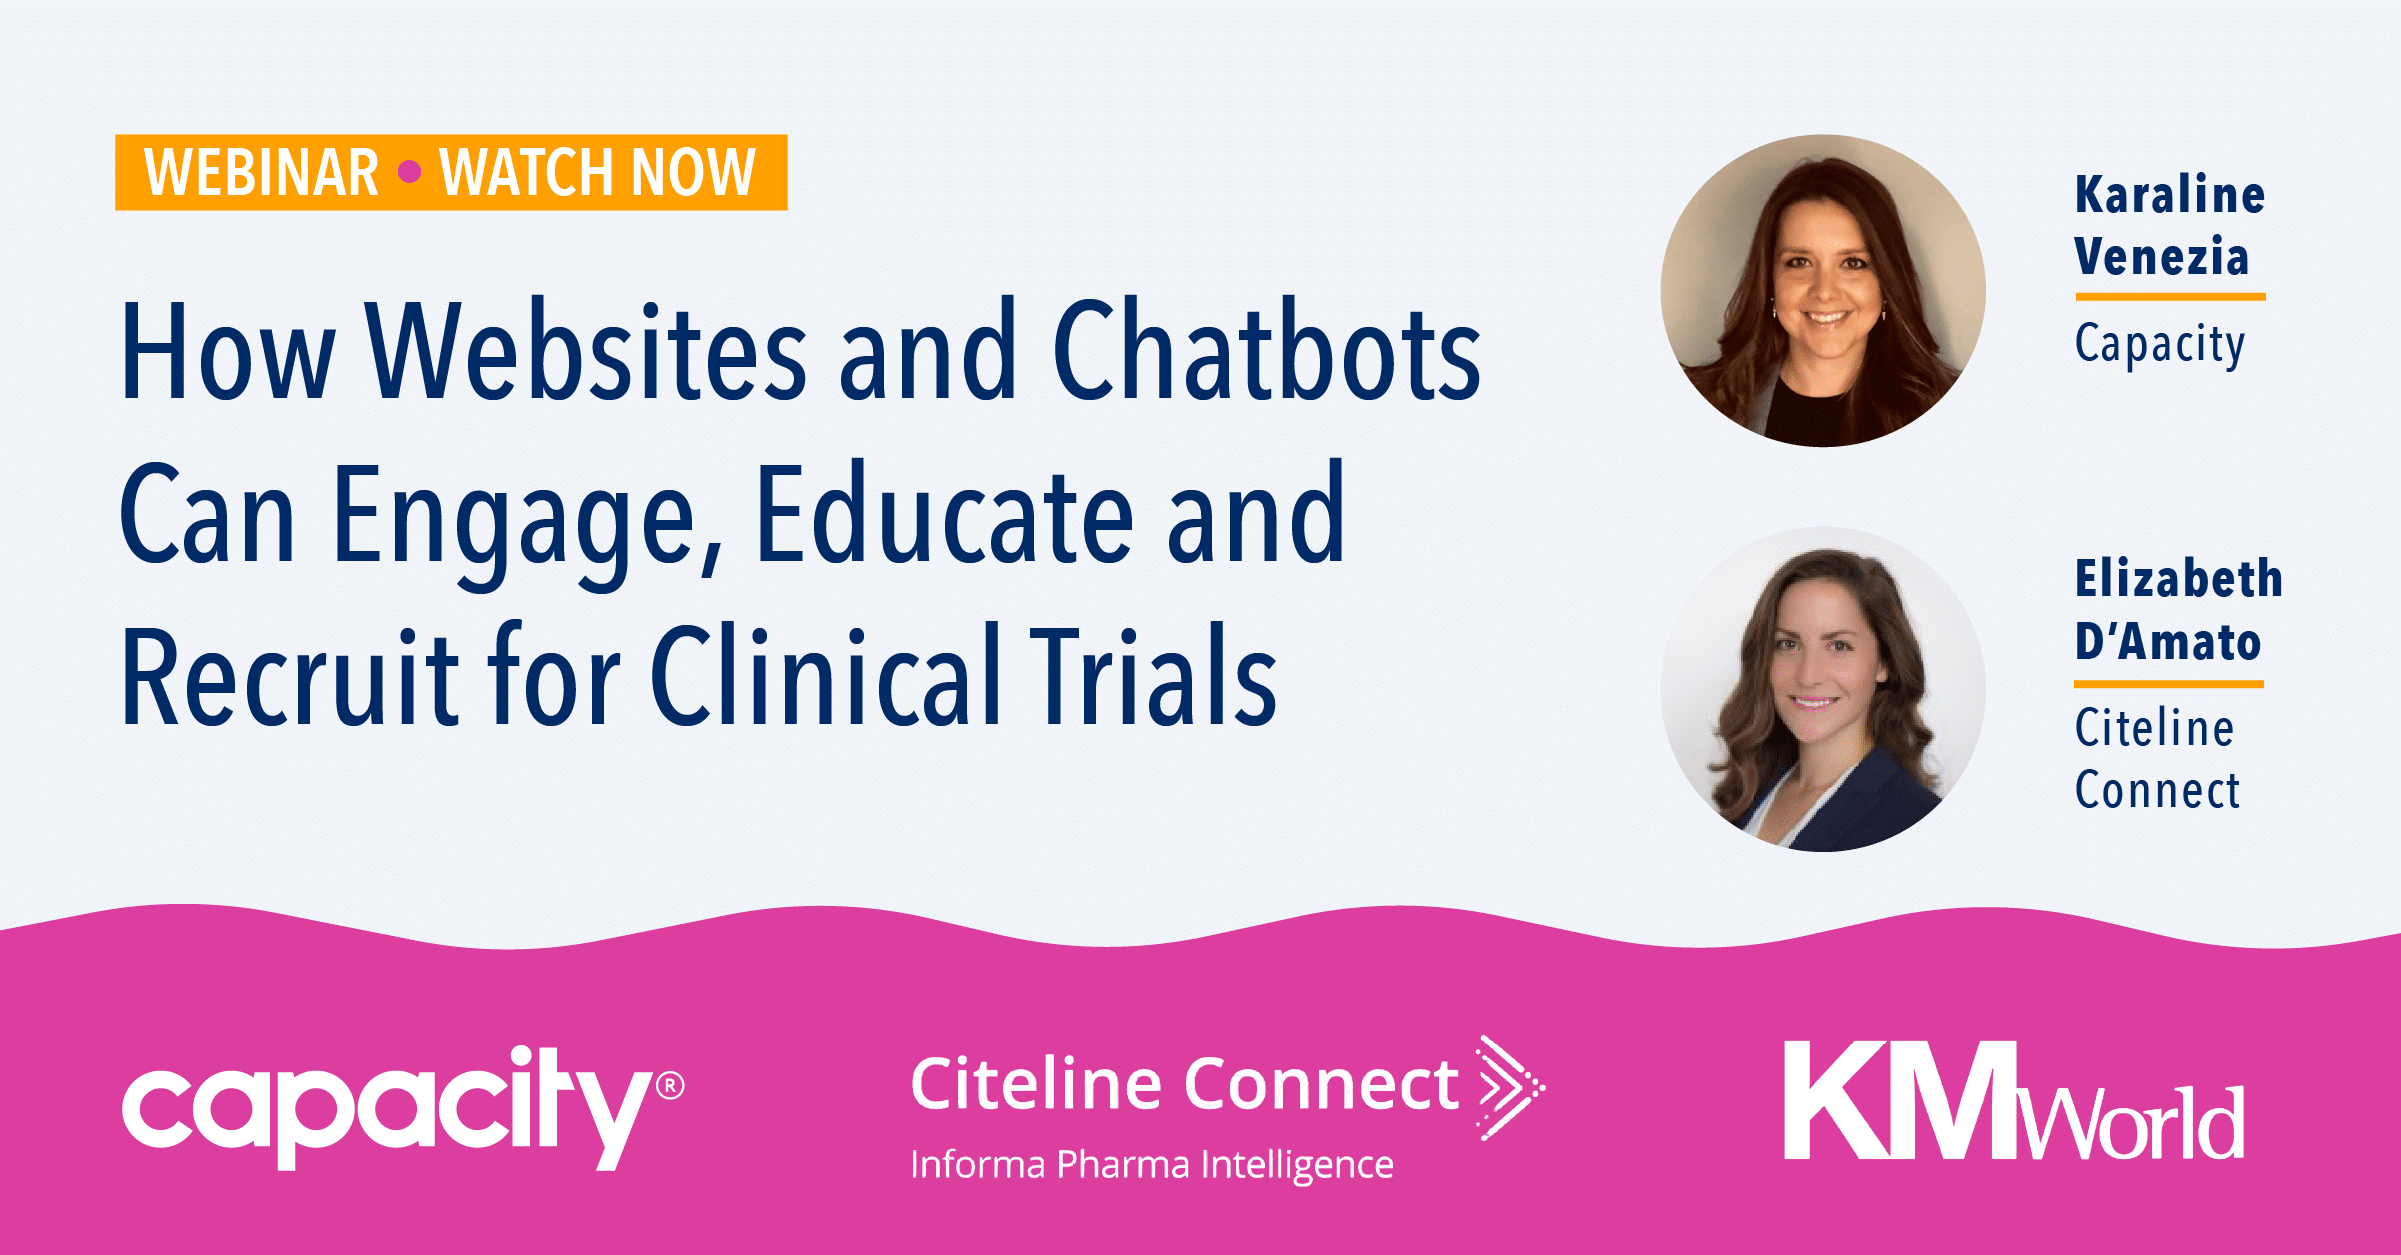 How Websites and Chatbots Can Engage, Educate, and Recruit for Clinical Trials